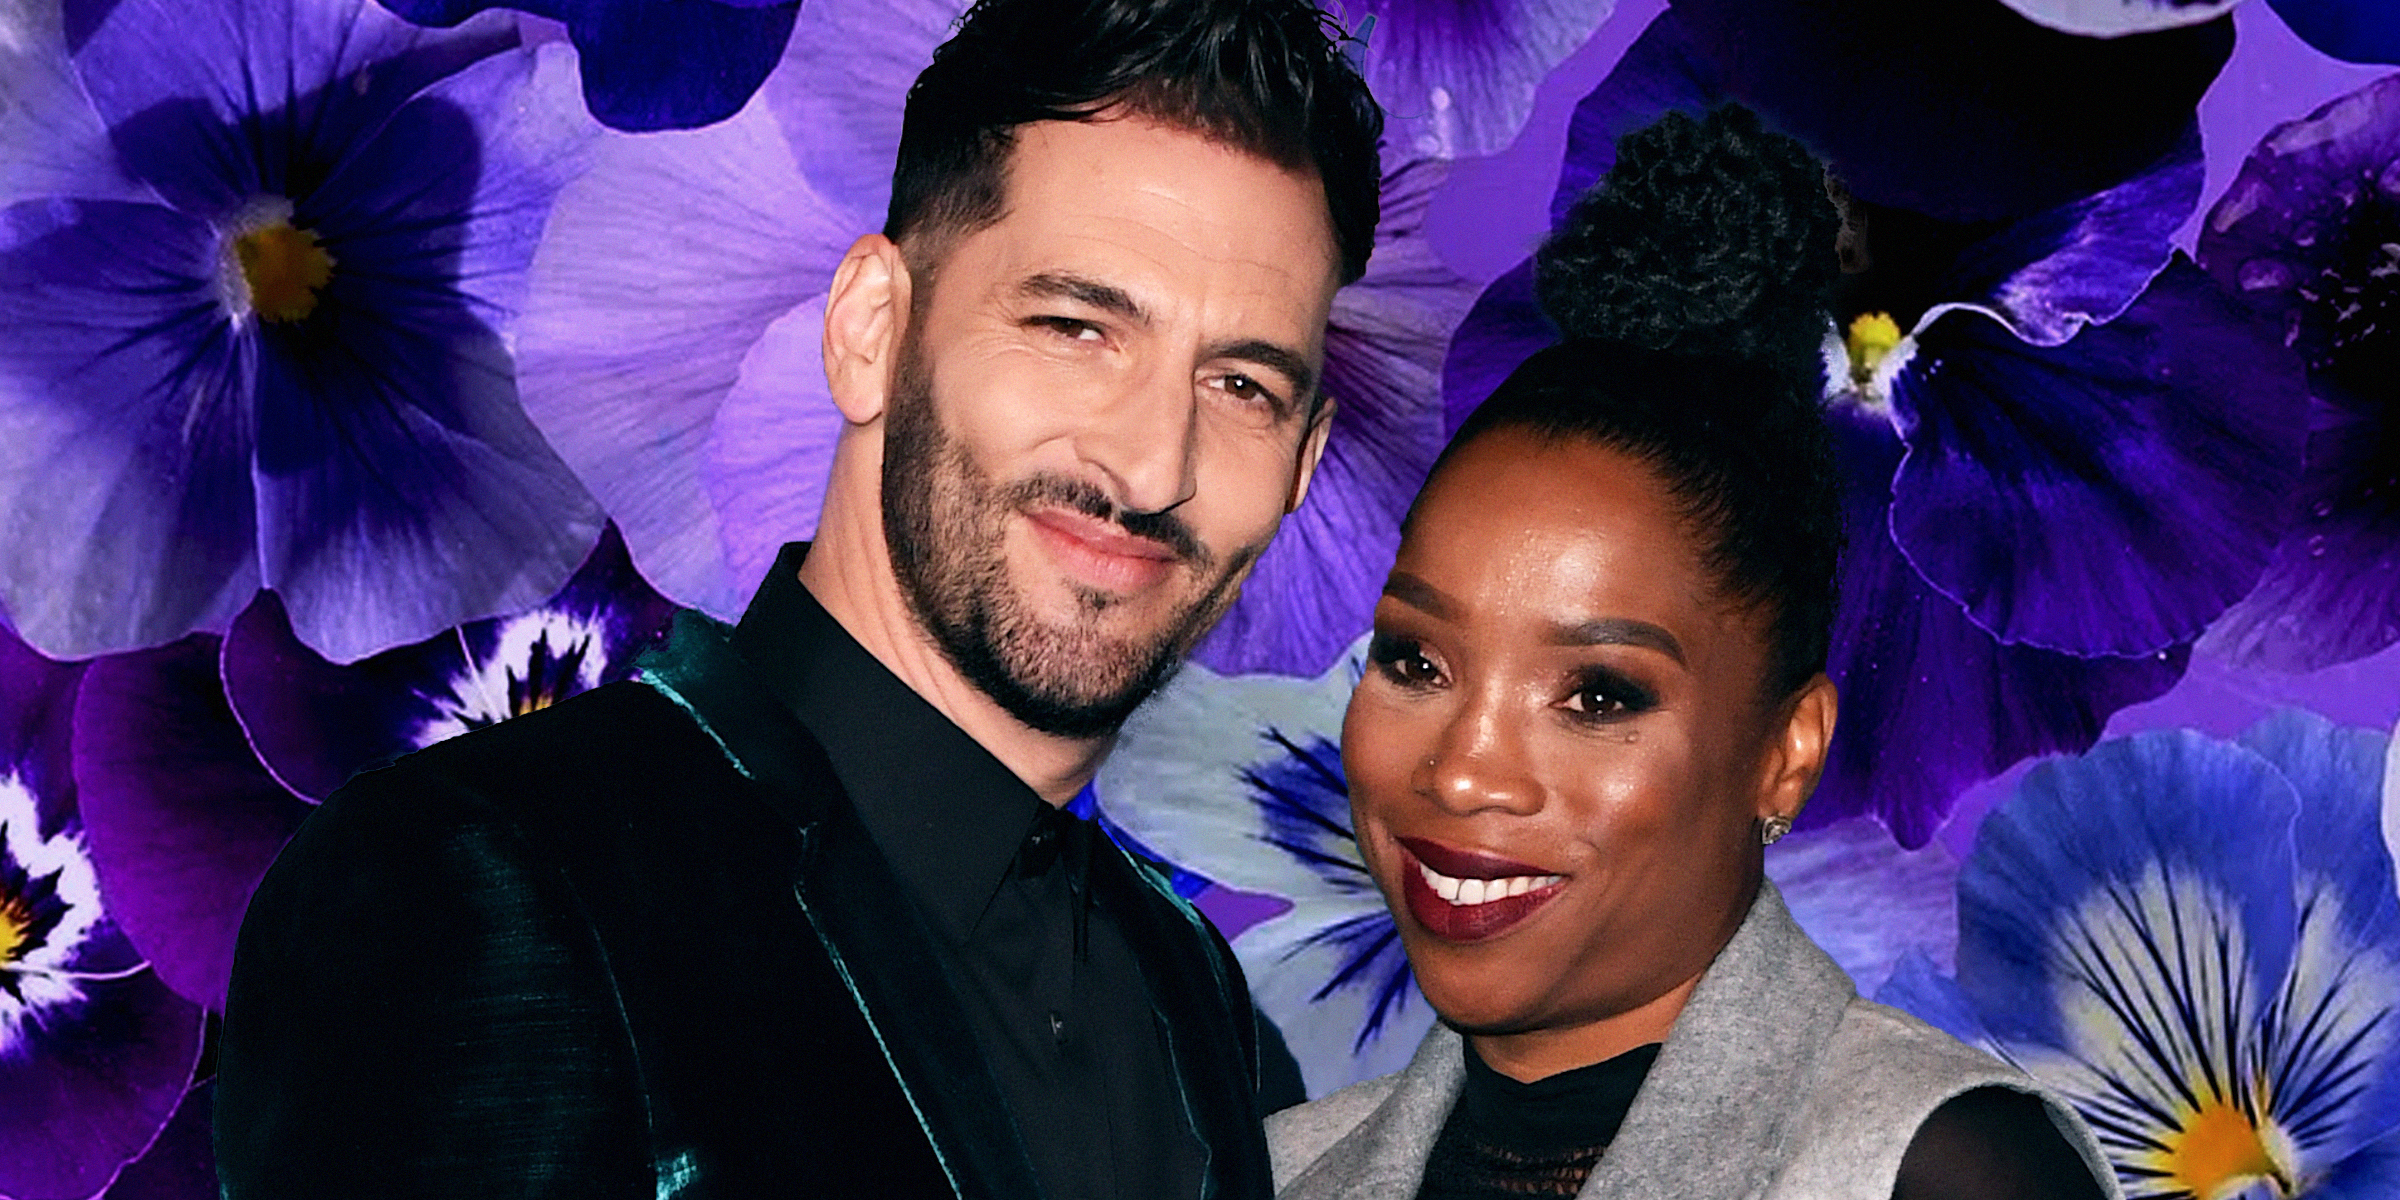 Jon B and Danette Jackson | Source: Getty Images